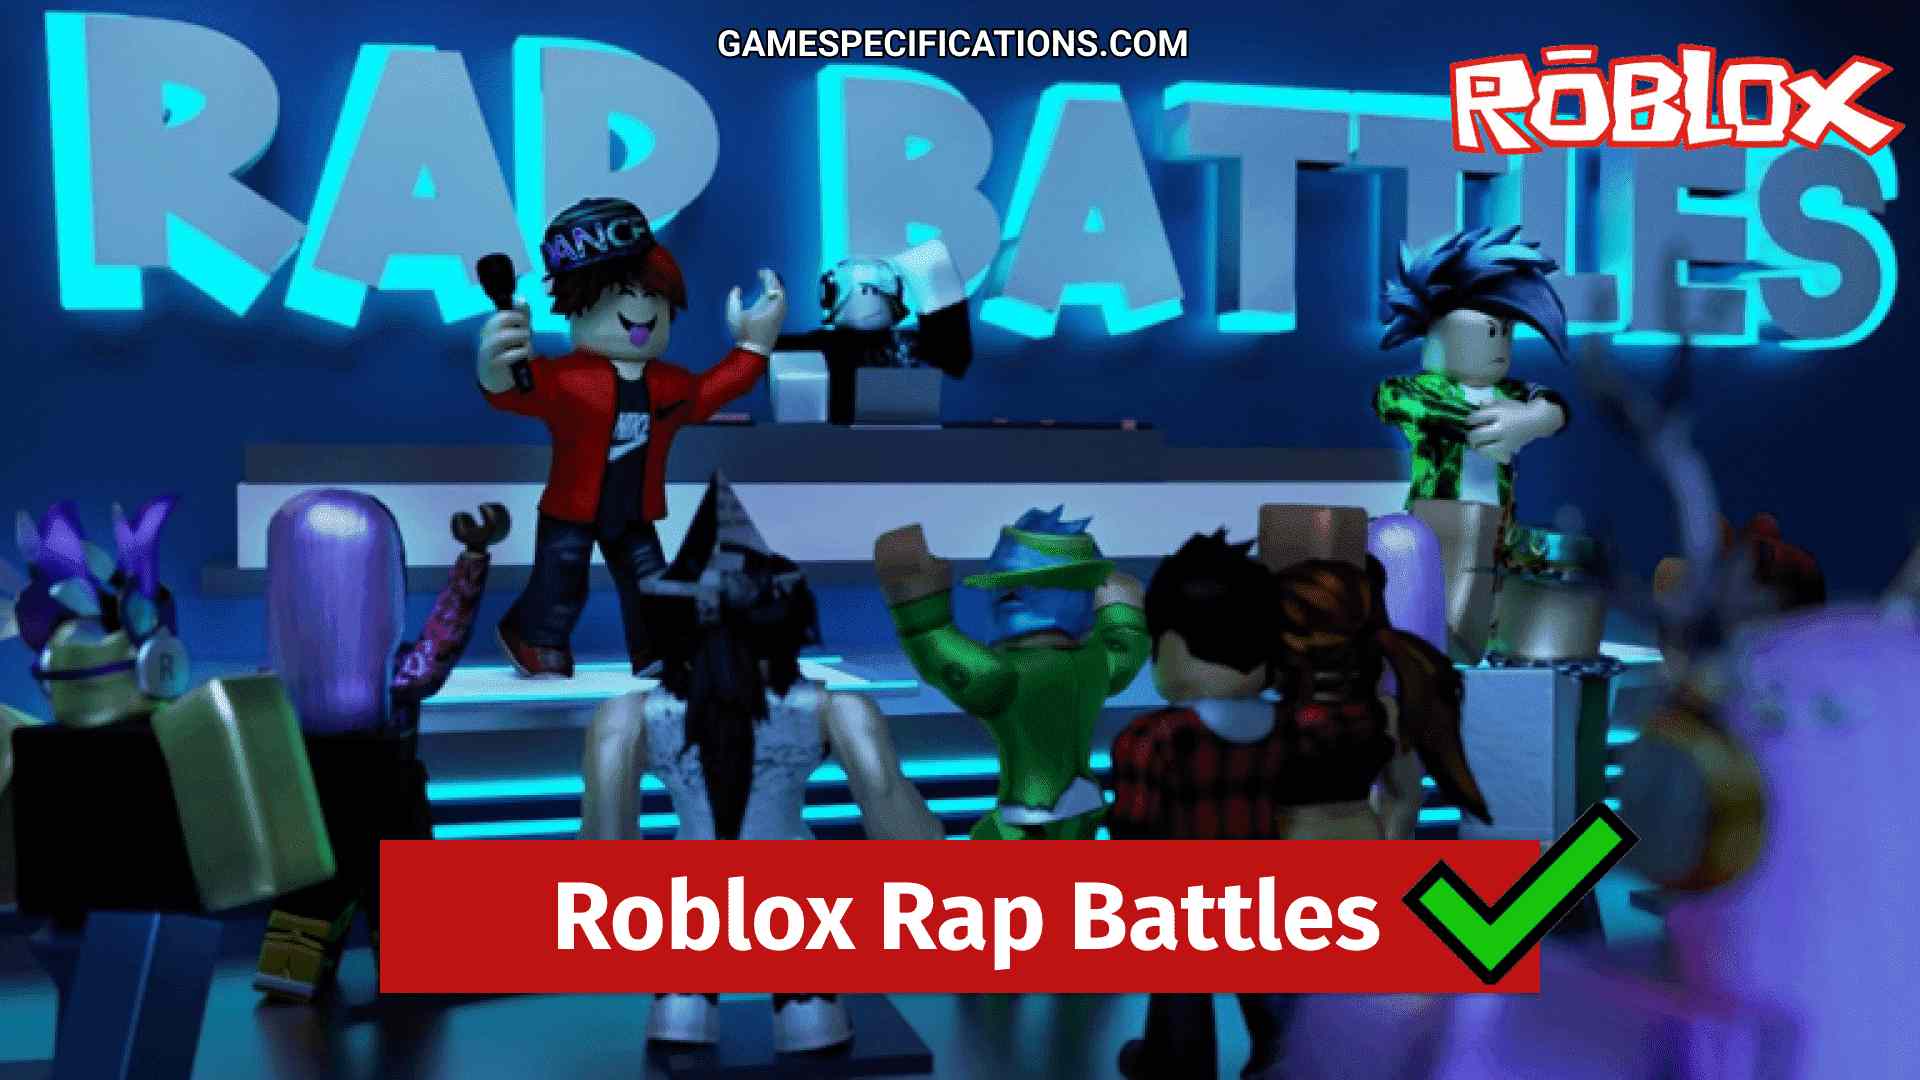 Awesome Roblox Rap Battles Explained With Lyrics Game Specifications - awesome raps for roblox